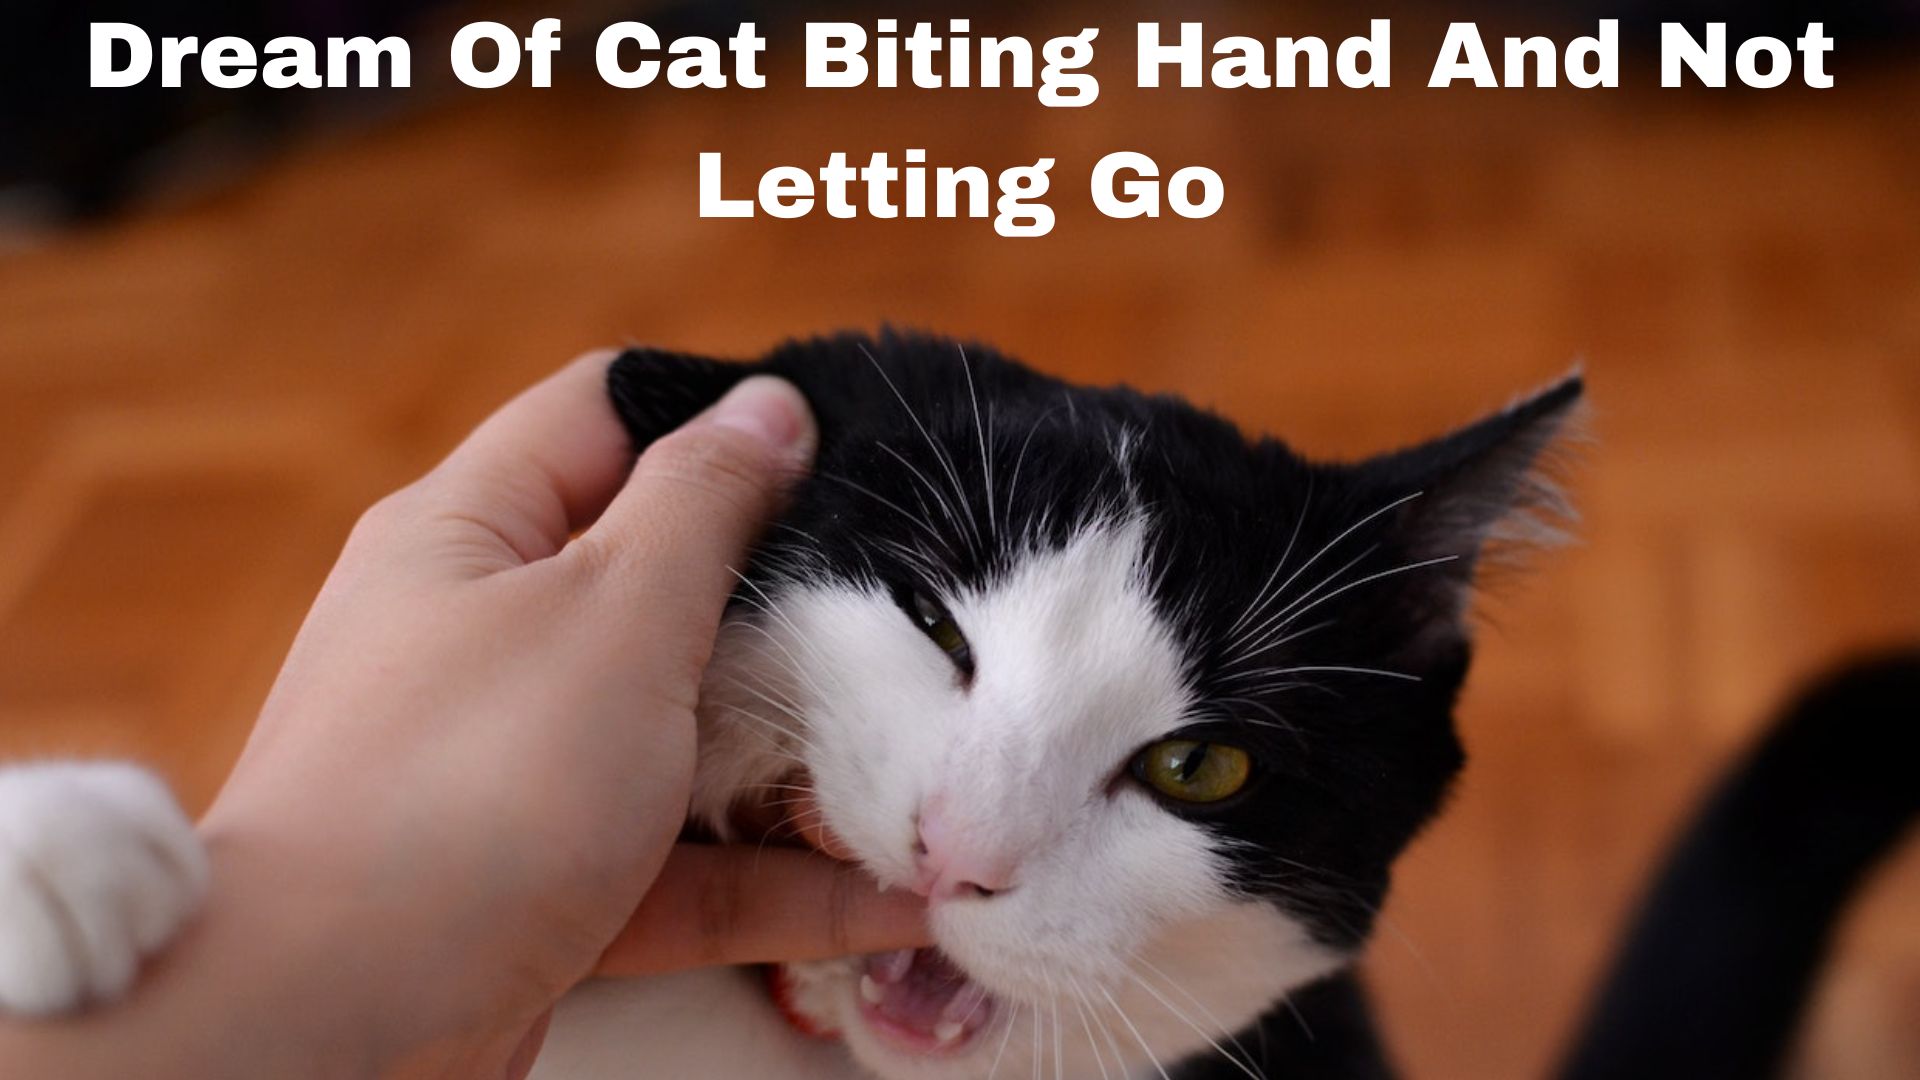 Dream Of Cat Biting Hand And Not Letting Go - It Signals Your Perseverance And Tenacity